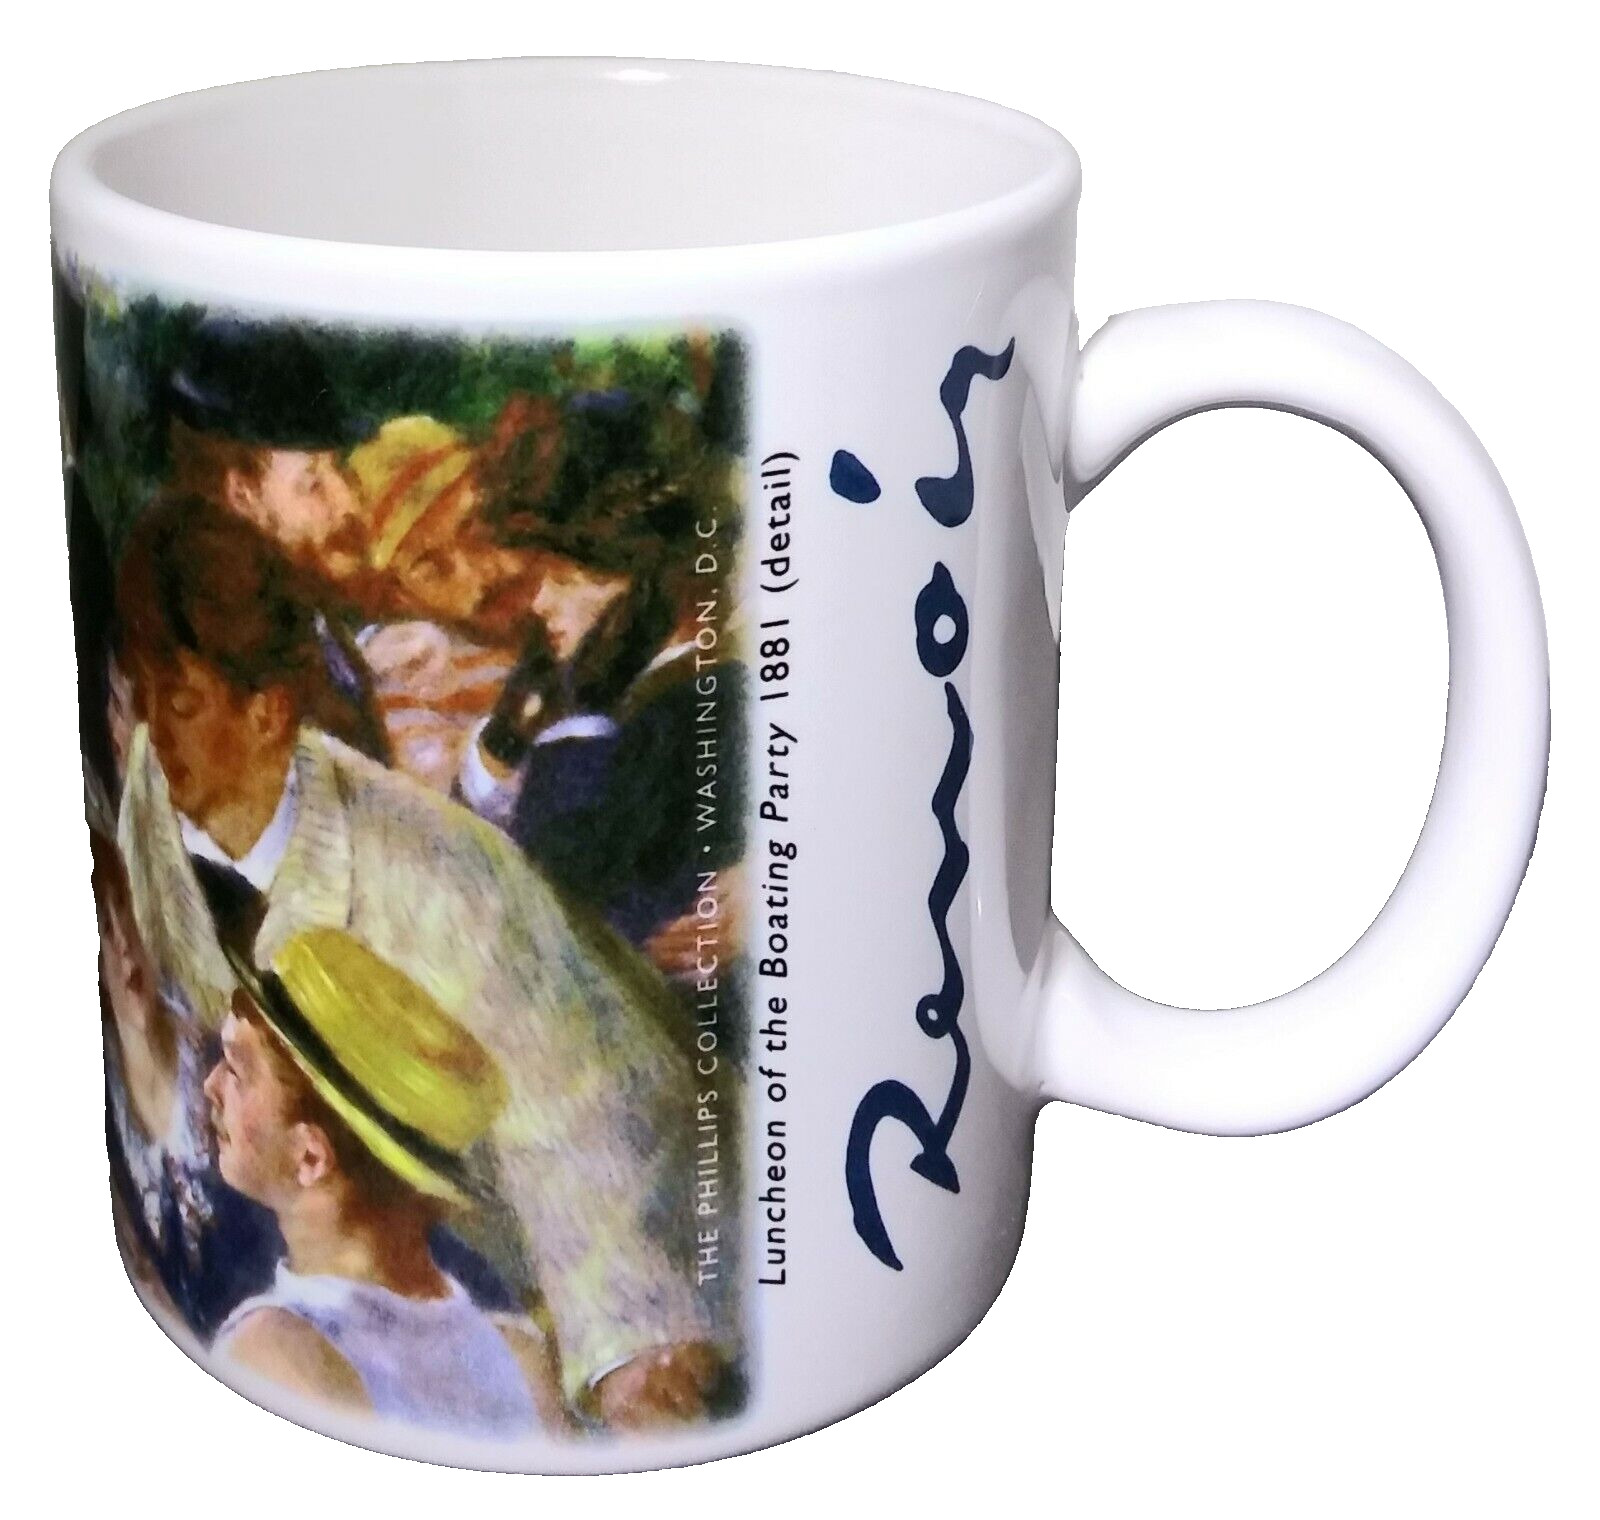 Renoir Luncheon of the Boating Party Artwork Coffee Mug 9 FL OZ White Cup